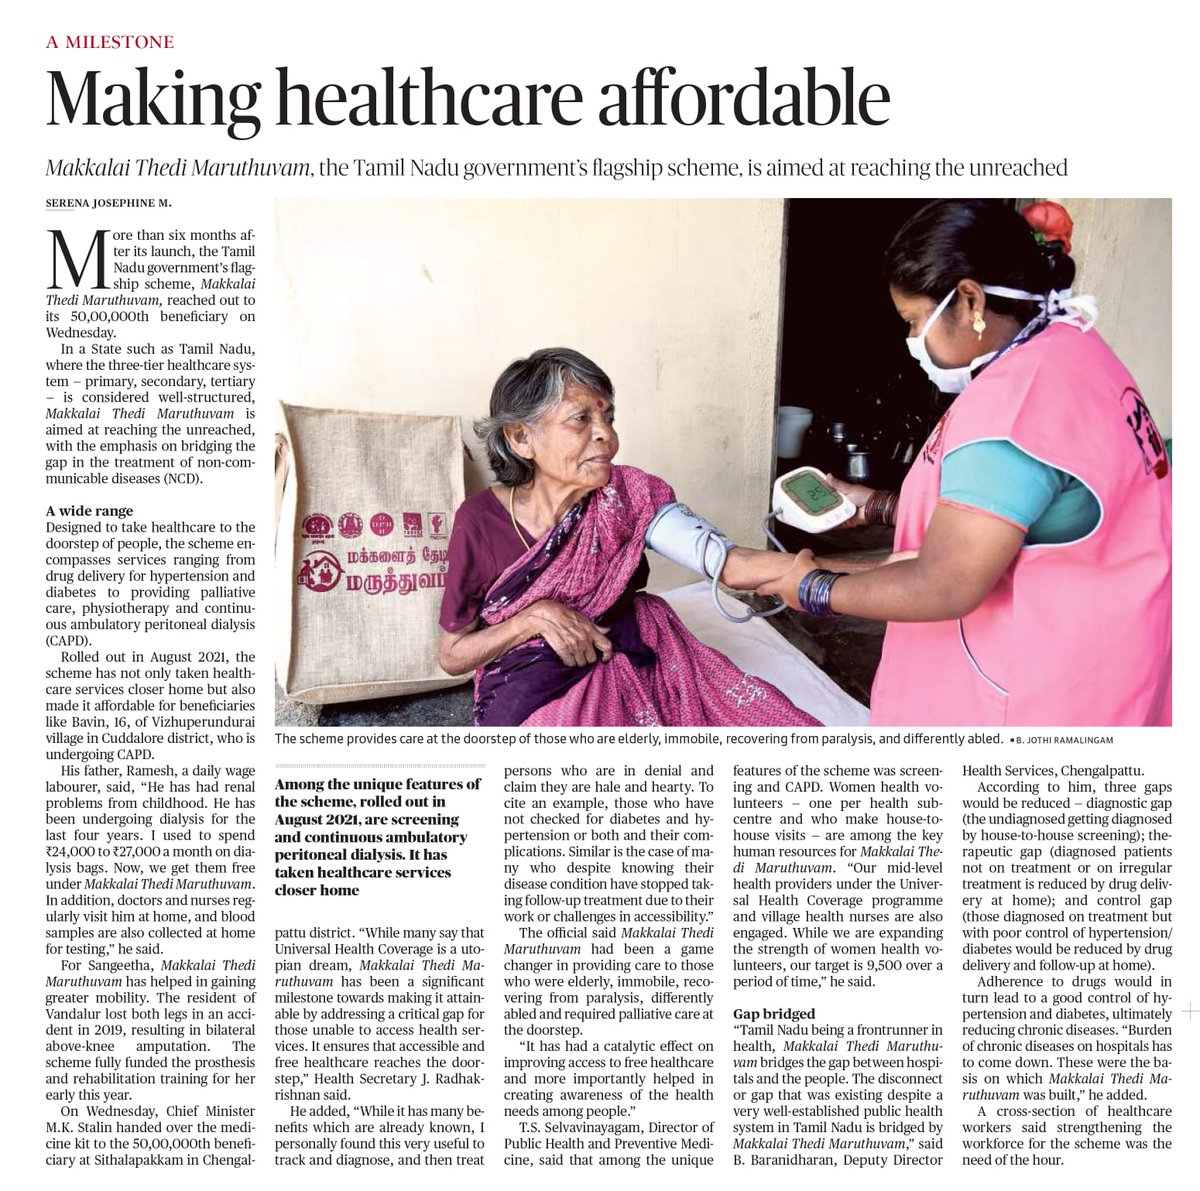 'I used to spend around Rs.27,000/month on dialysis bags. Now it's free under #MakkalaiThediMaruthuvam. Doctors & nurses regularly visit us for treatment'

TN's healthcare model continues to impact lives by bridging the accessibility gap & improving affordability
#DravidianModel